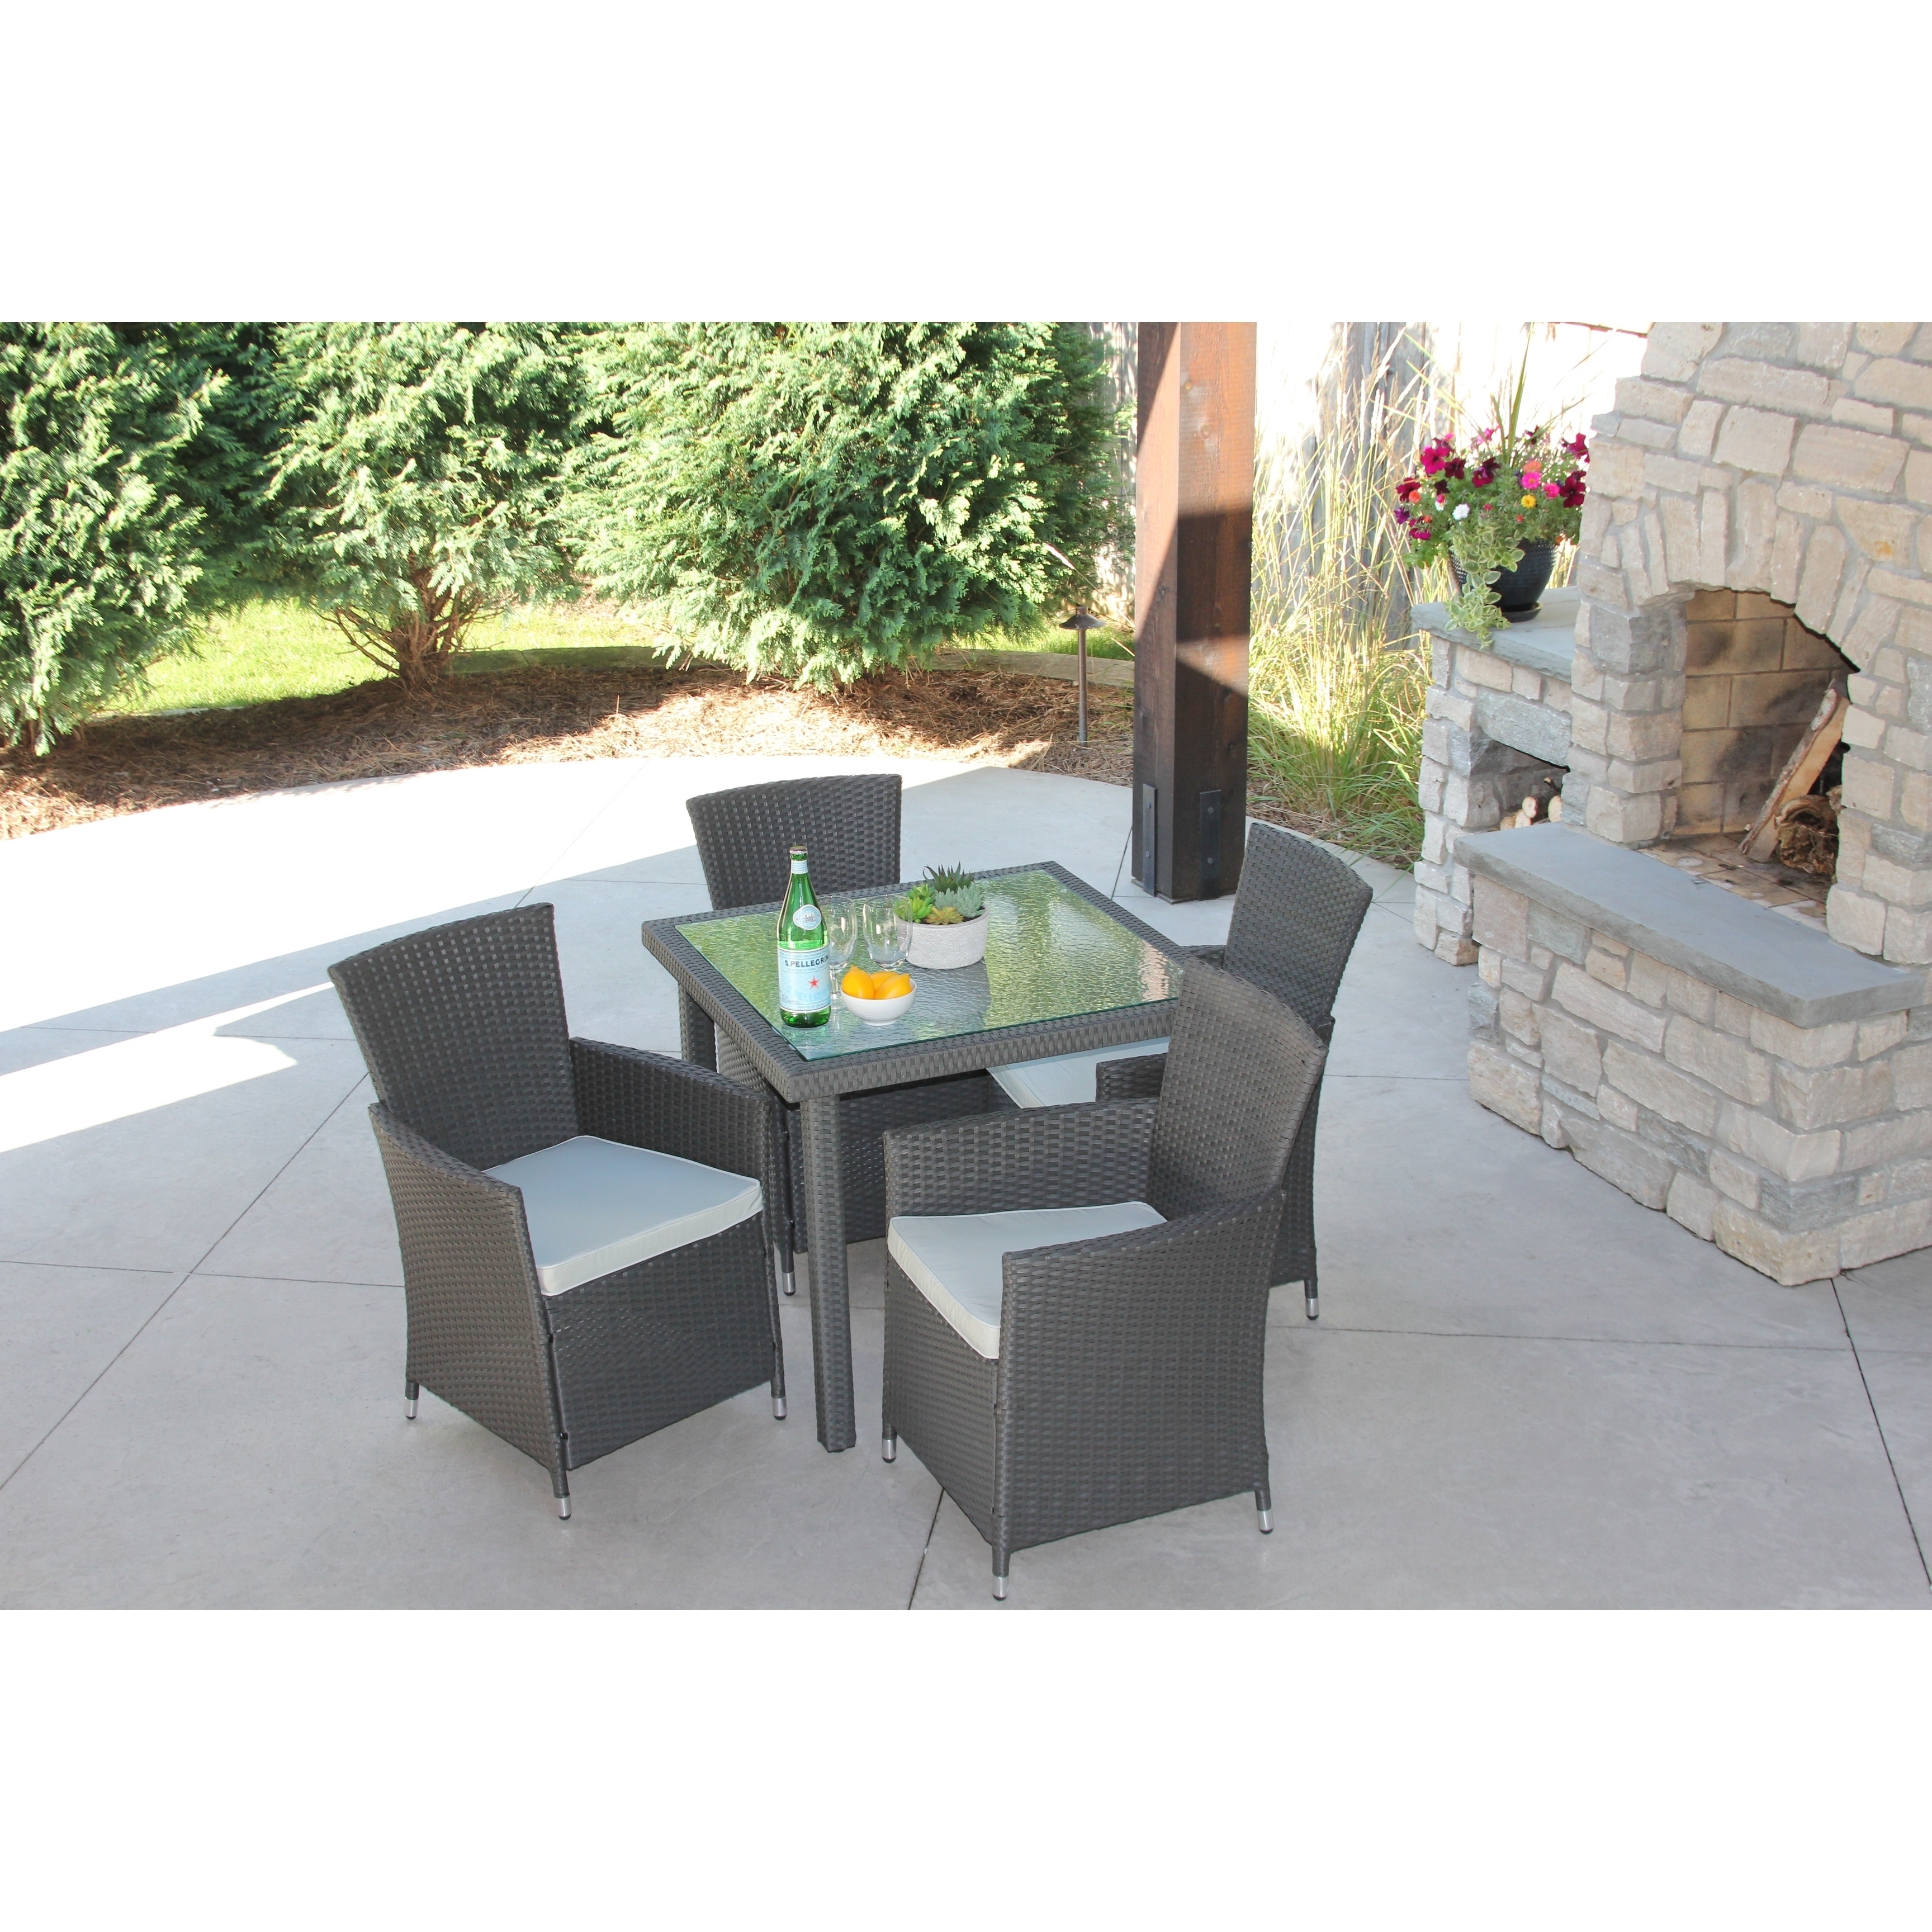 Shop 5 Piece Gray Wicker Outdoor Dining Set With Square Wicker